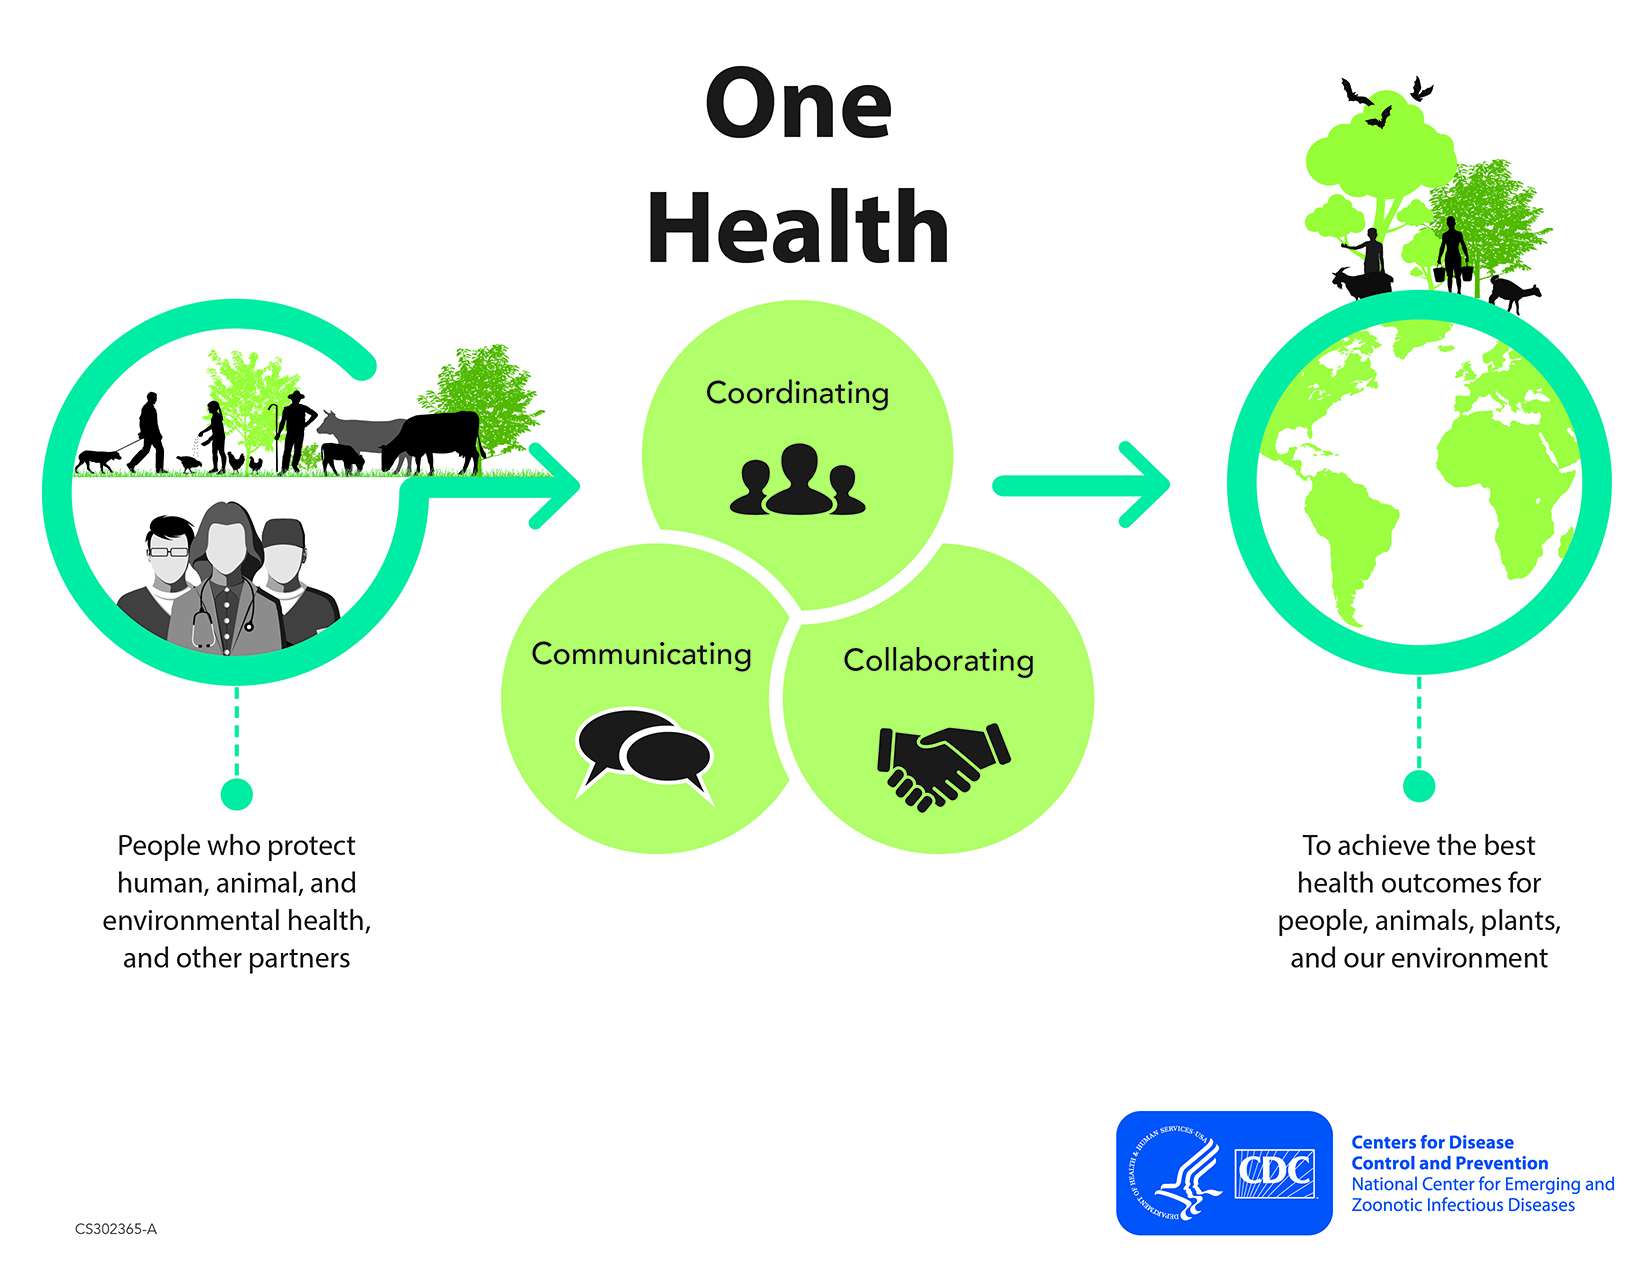 The concept of One Health. | Photo by Centers for Disease Control and Prevention.